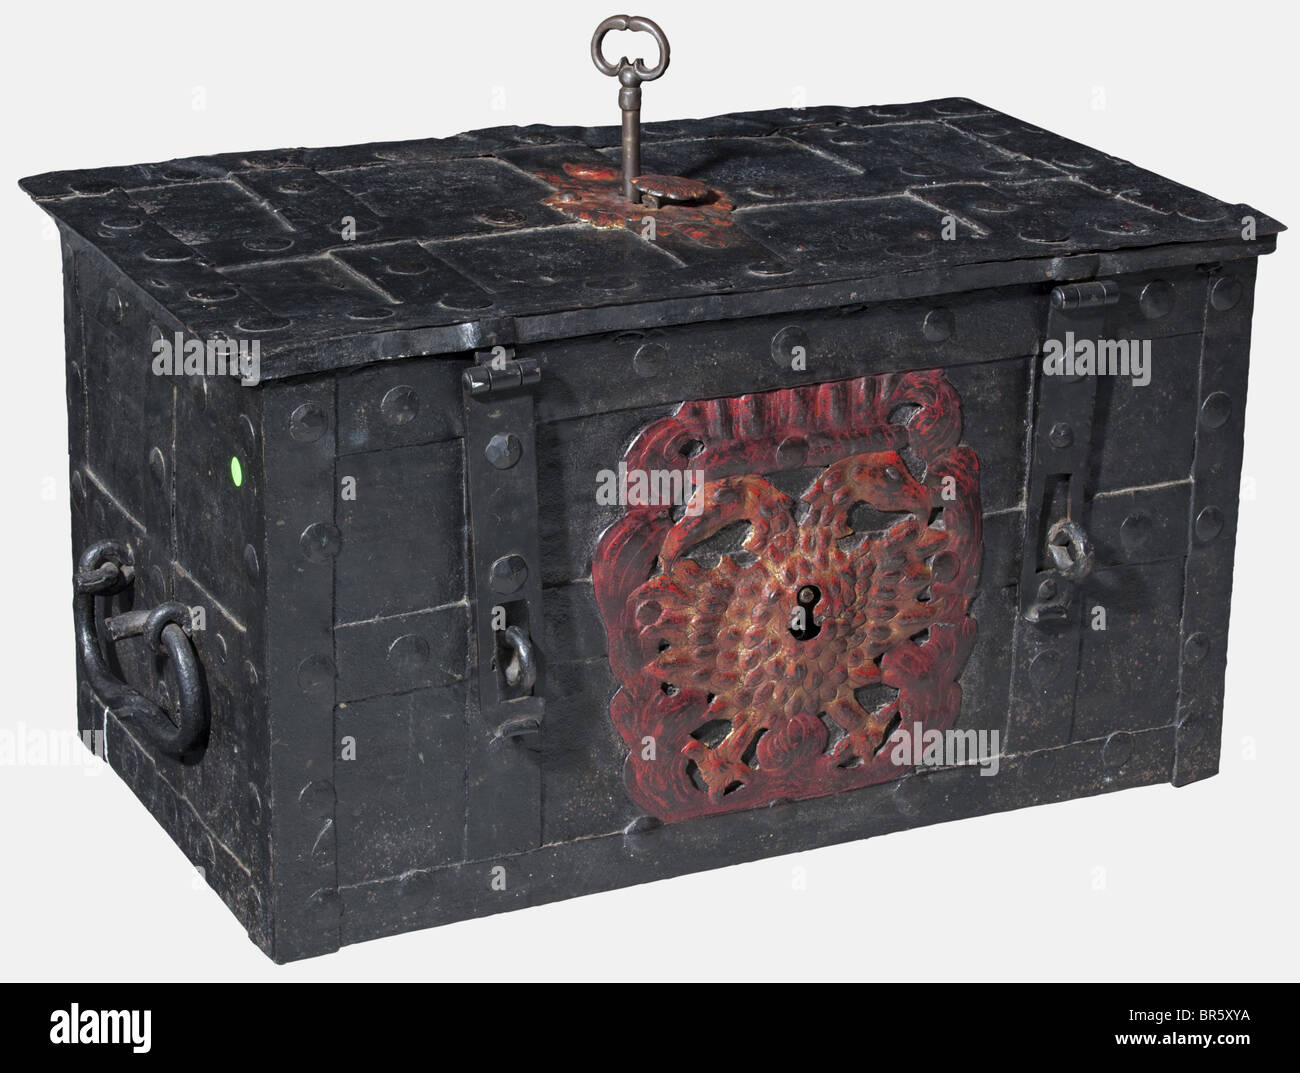 A German war chest, circa 1750 Rectangular strongbox with iron strap fittings. Hinged lid with seven latches, a keyhole with hammered escutcheon in colour and movable keyhole cover. Large lock cover plate on the inside with a coloured depiction of a decorative basket with flowers and fruits. Bogus lock on the front side, the richly hammered and openwork decorative escutcheon in the shape of a double-headed eagle. Two replacement hasps, a movable carrying handle on either side. Original colour version. Dimensions 77 x 43 x 44.5 cm. historic, historical, 18th cen, Stock Photo